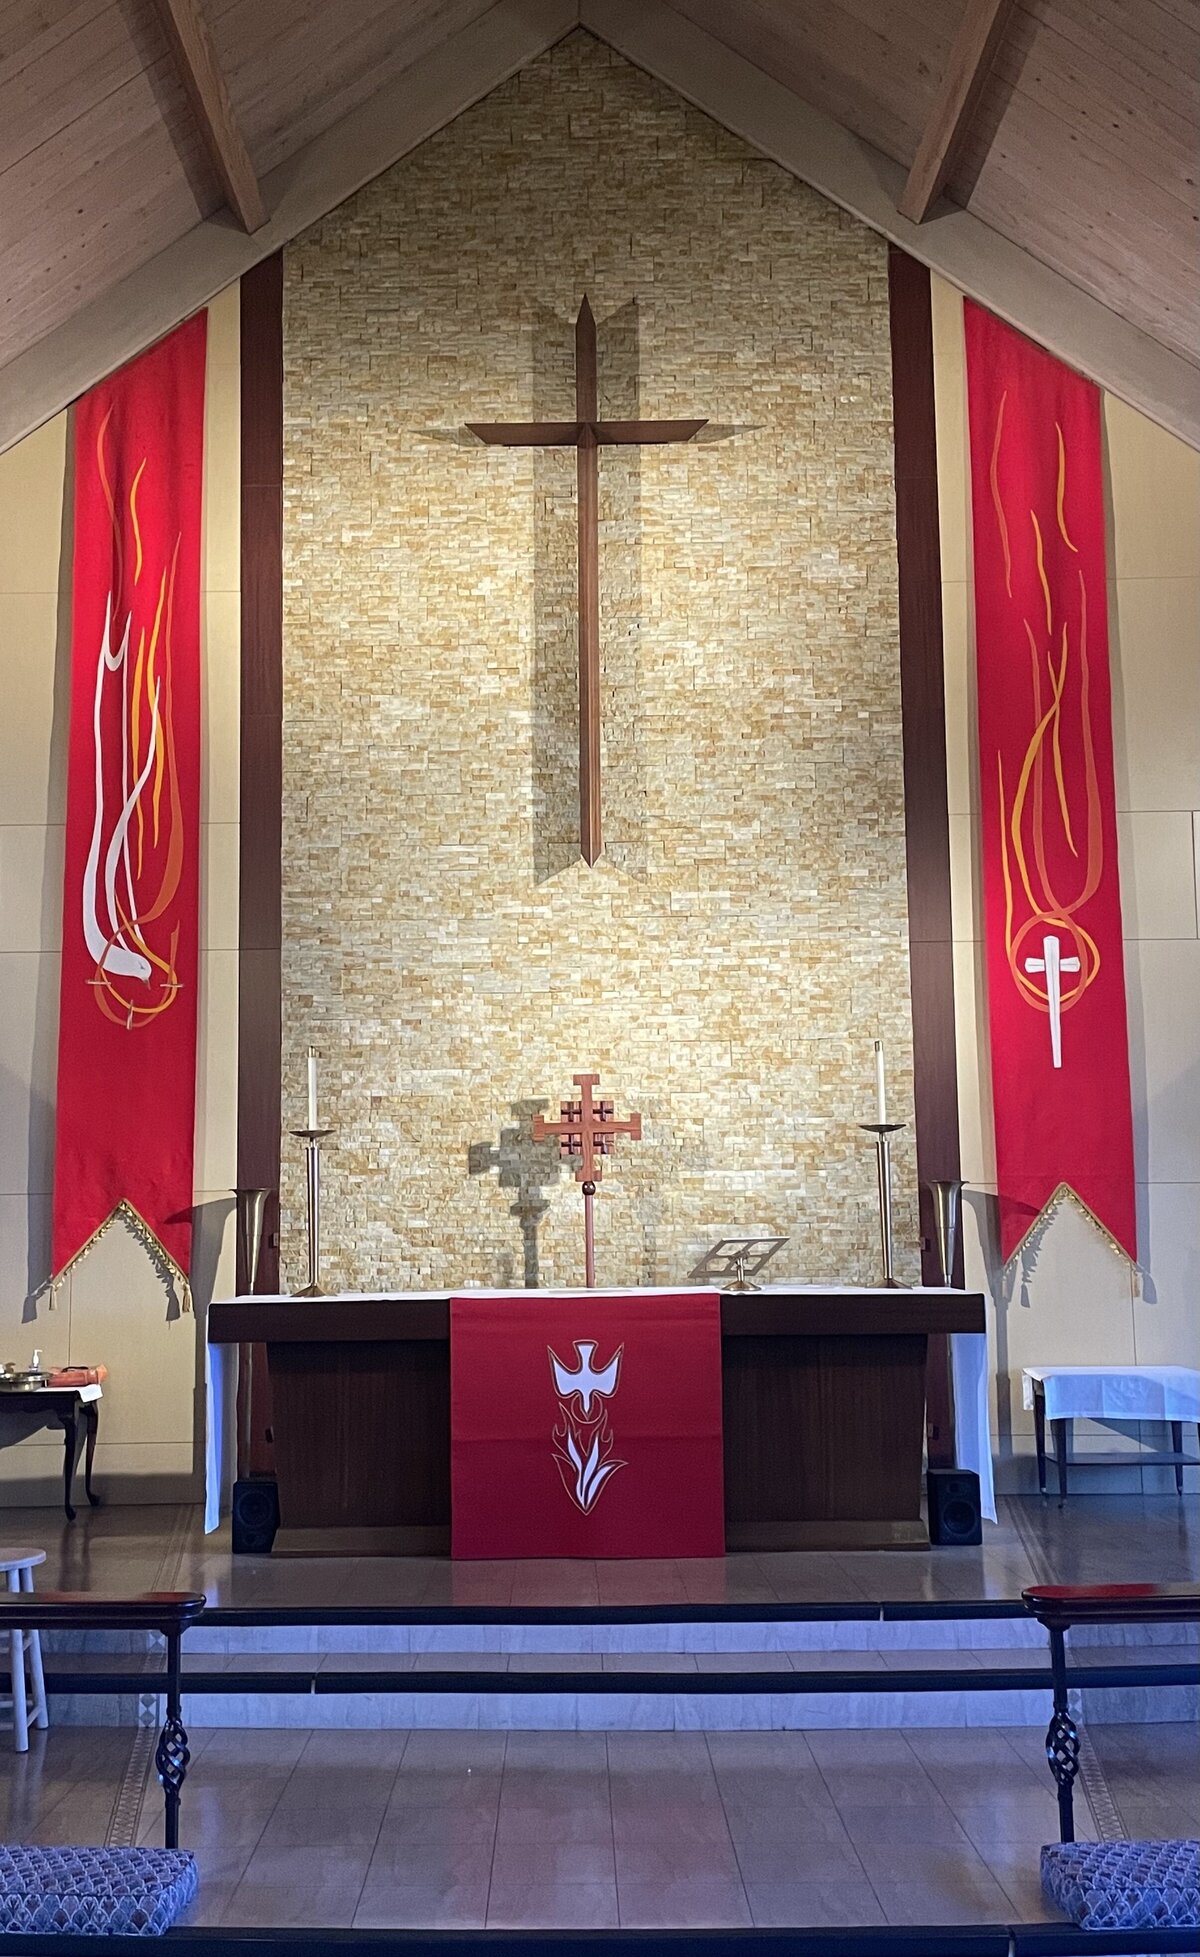 inside st. andrew's lutheran church